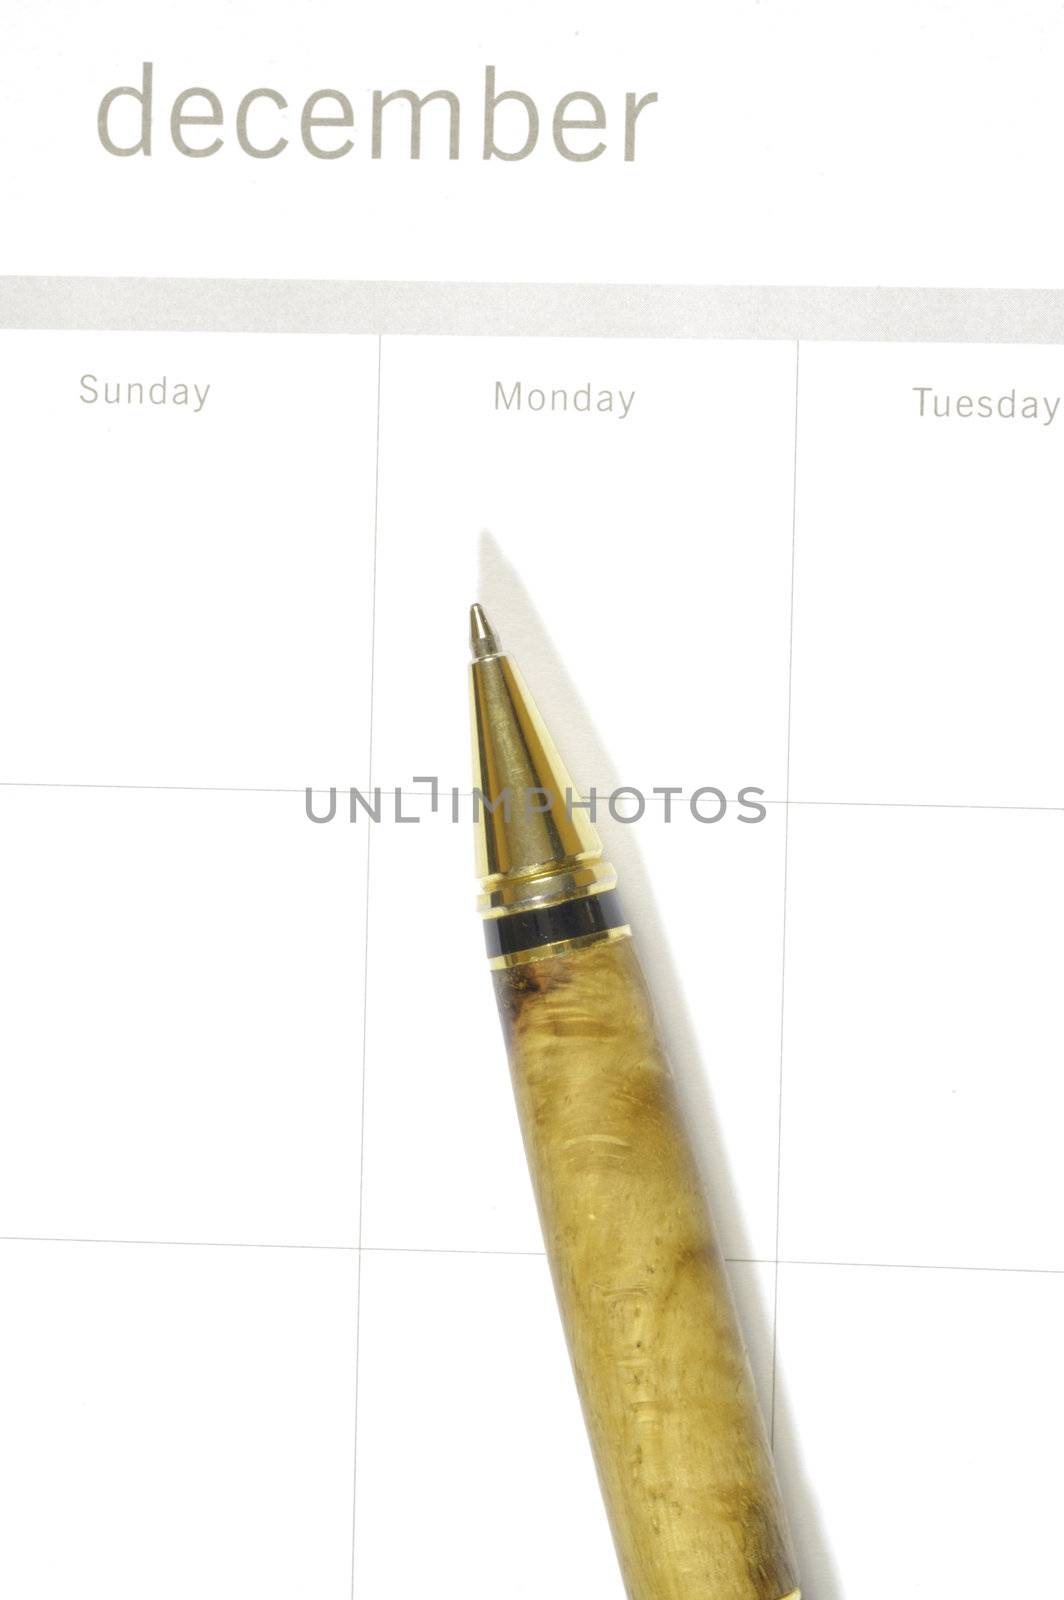 pen ready to use in dairy for December